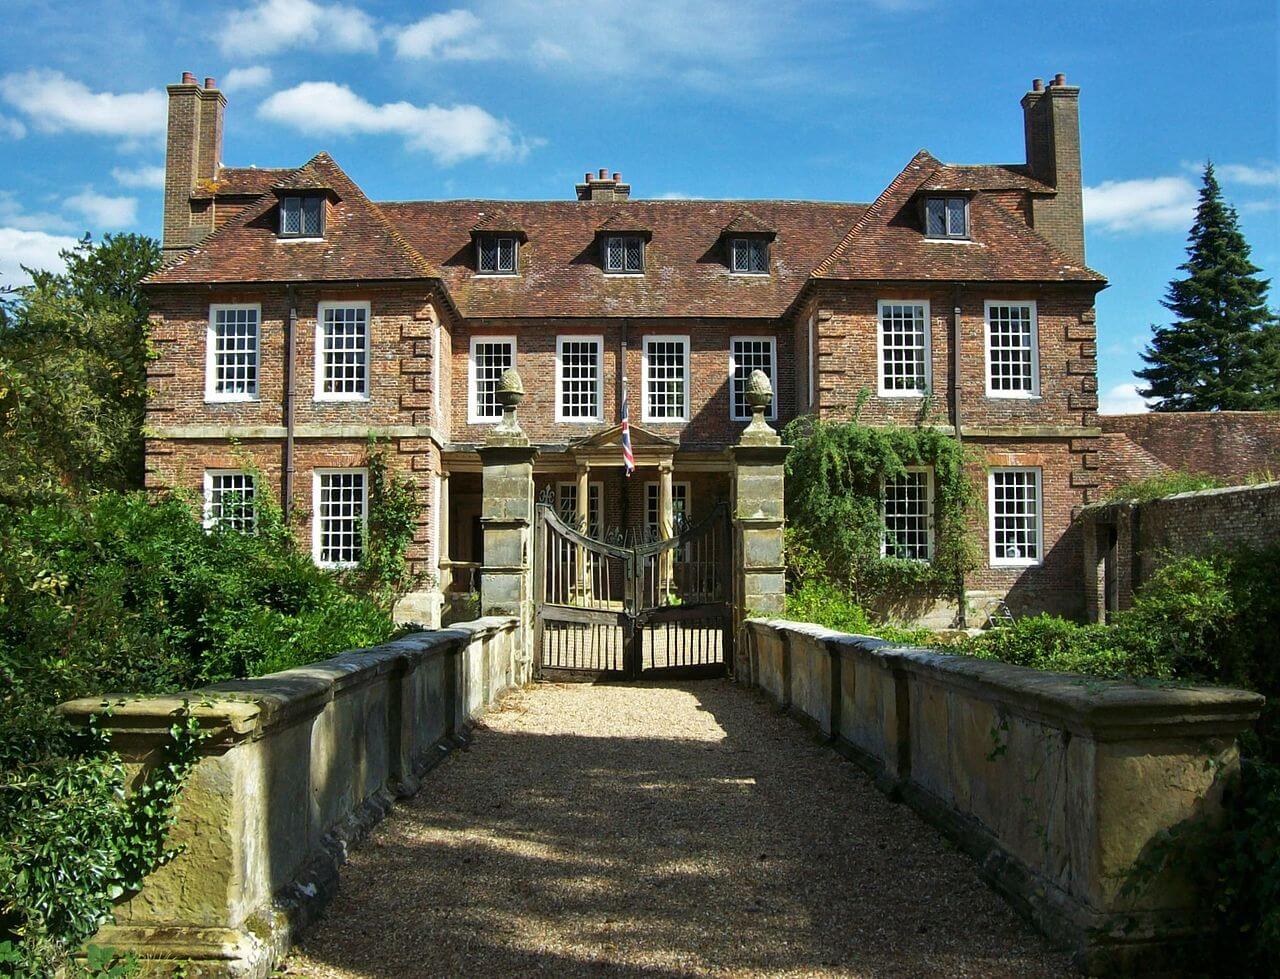 groombridge place historic country house kent Home